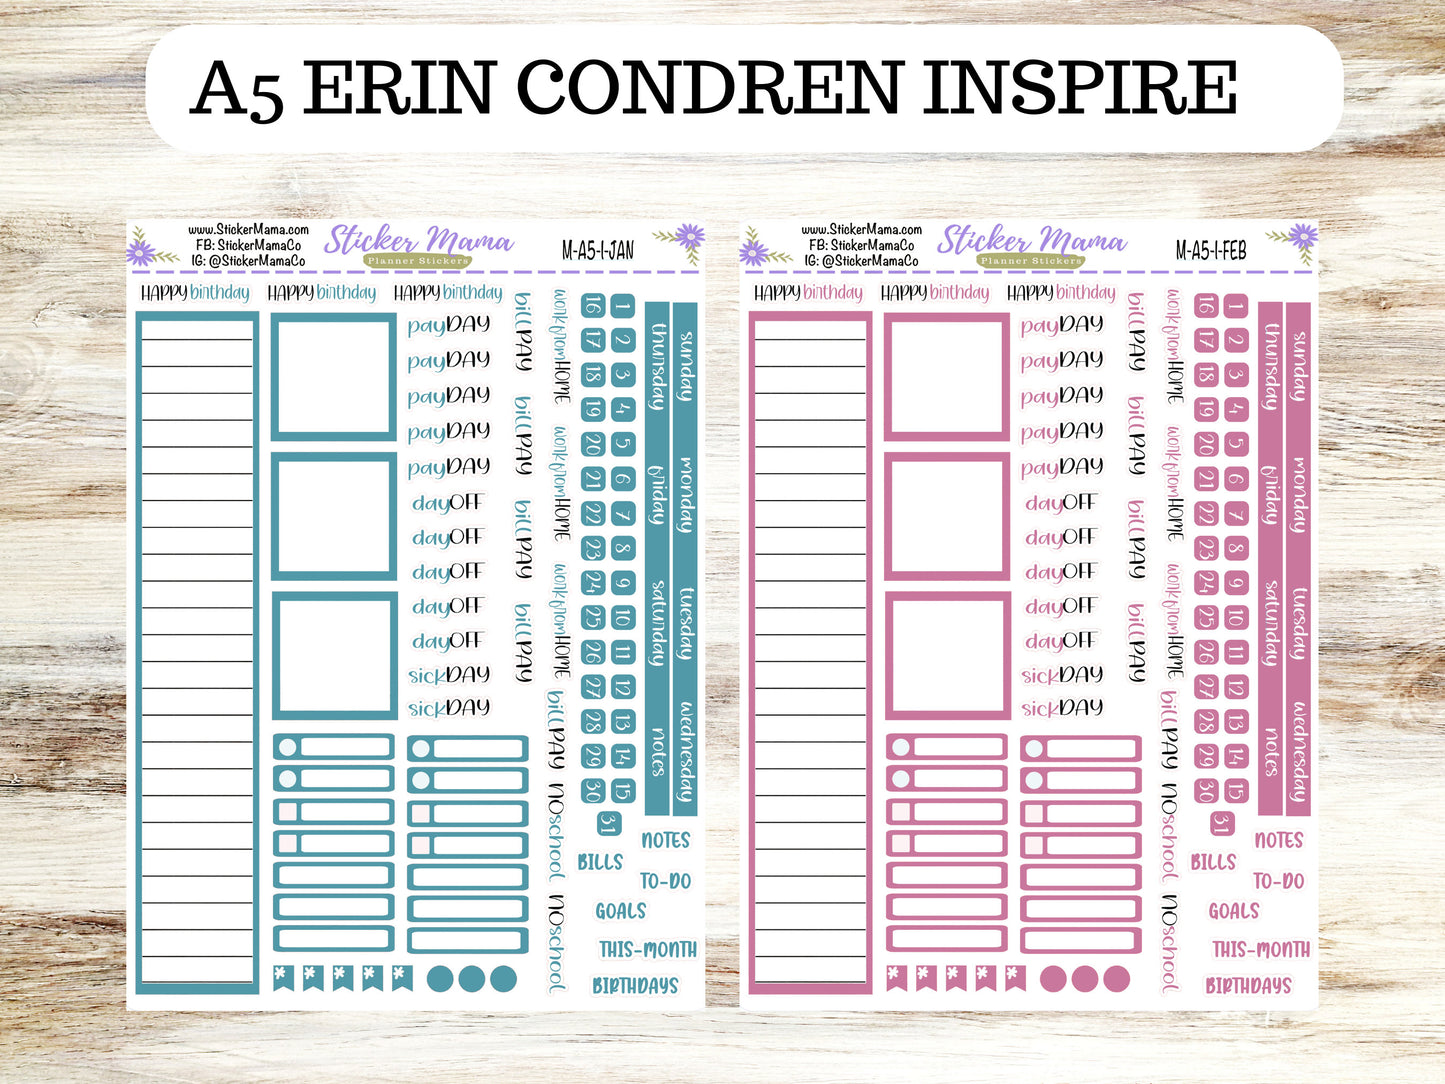 NEW ERIN CONDREN Inspire - M-A5-I || A5 Inspire Monthly Kit || Monthly Planner Stickers ||